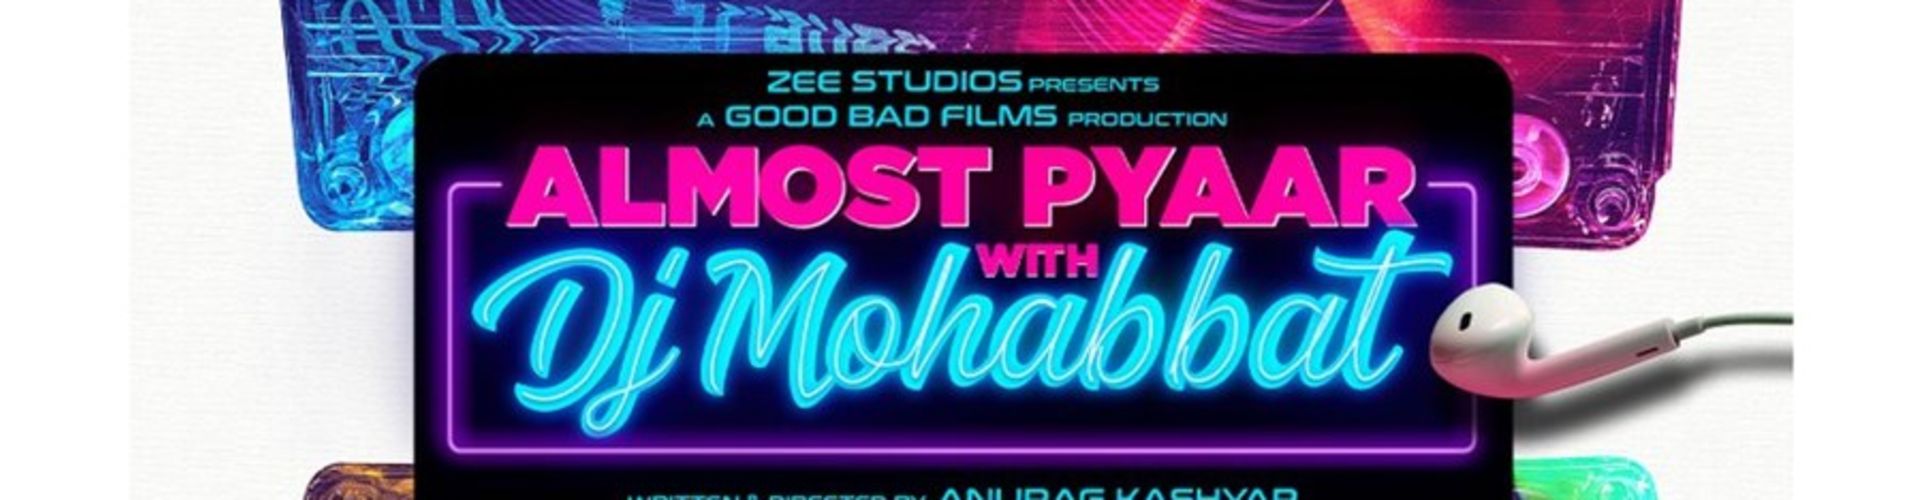 Almost Pyaar With DJ Mohabbat Will Have Its World Premiere At Marrakech Film Festival